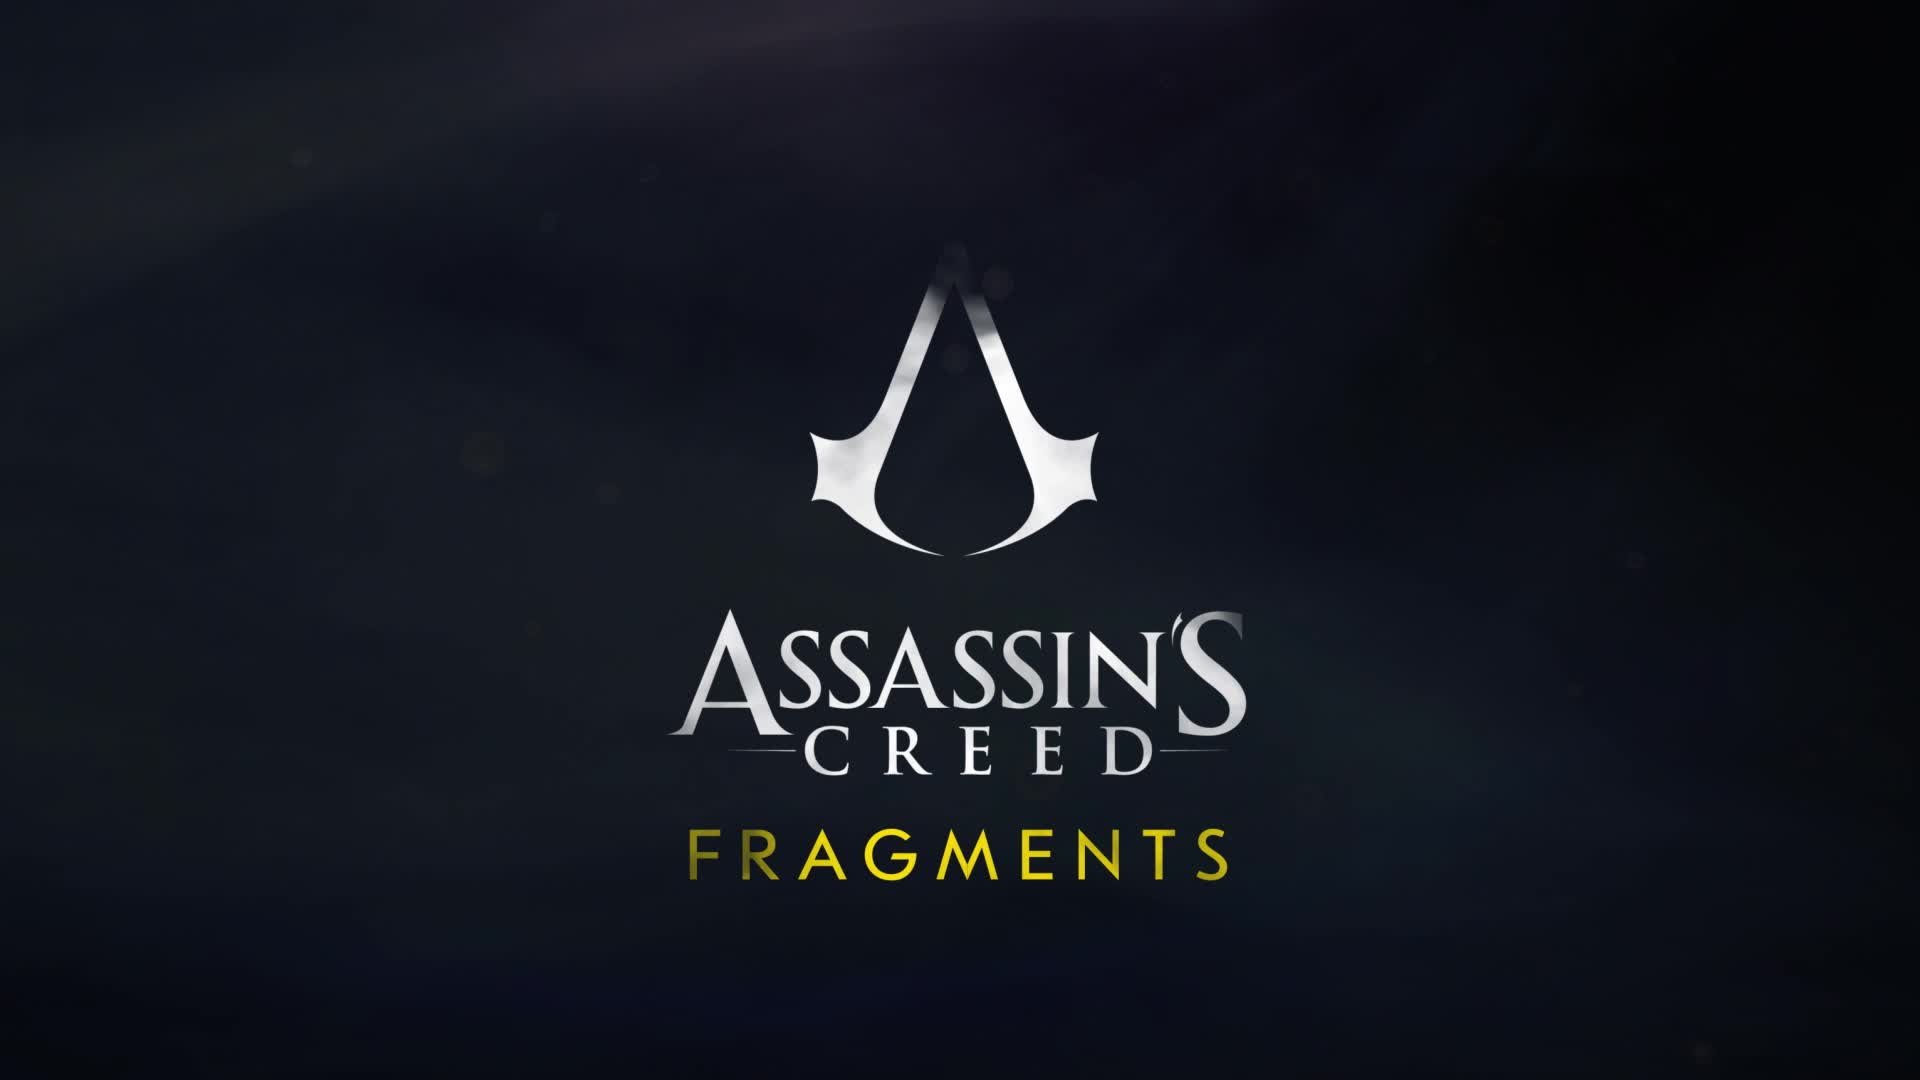 Assassin's Creed Fragments